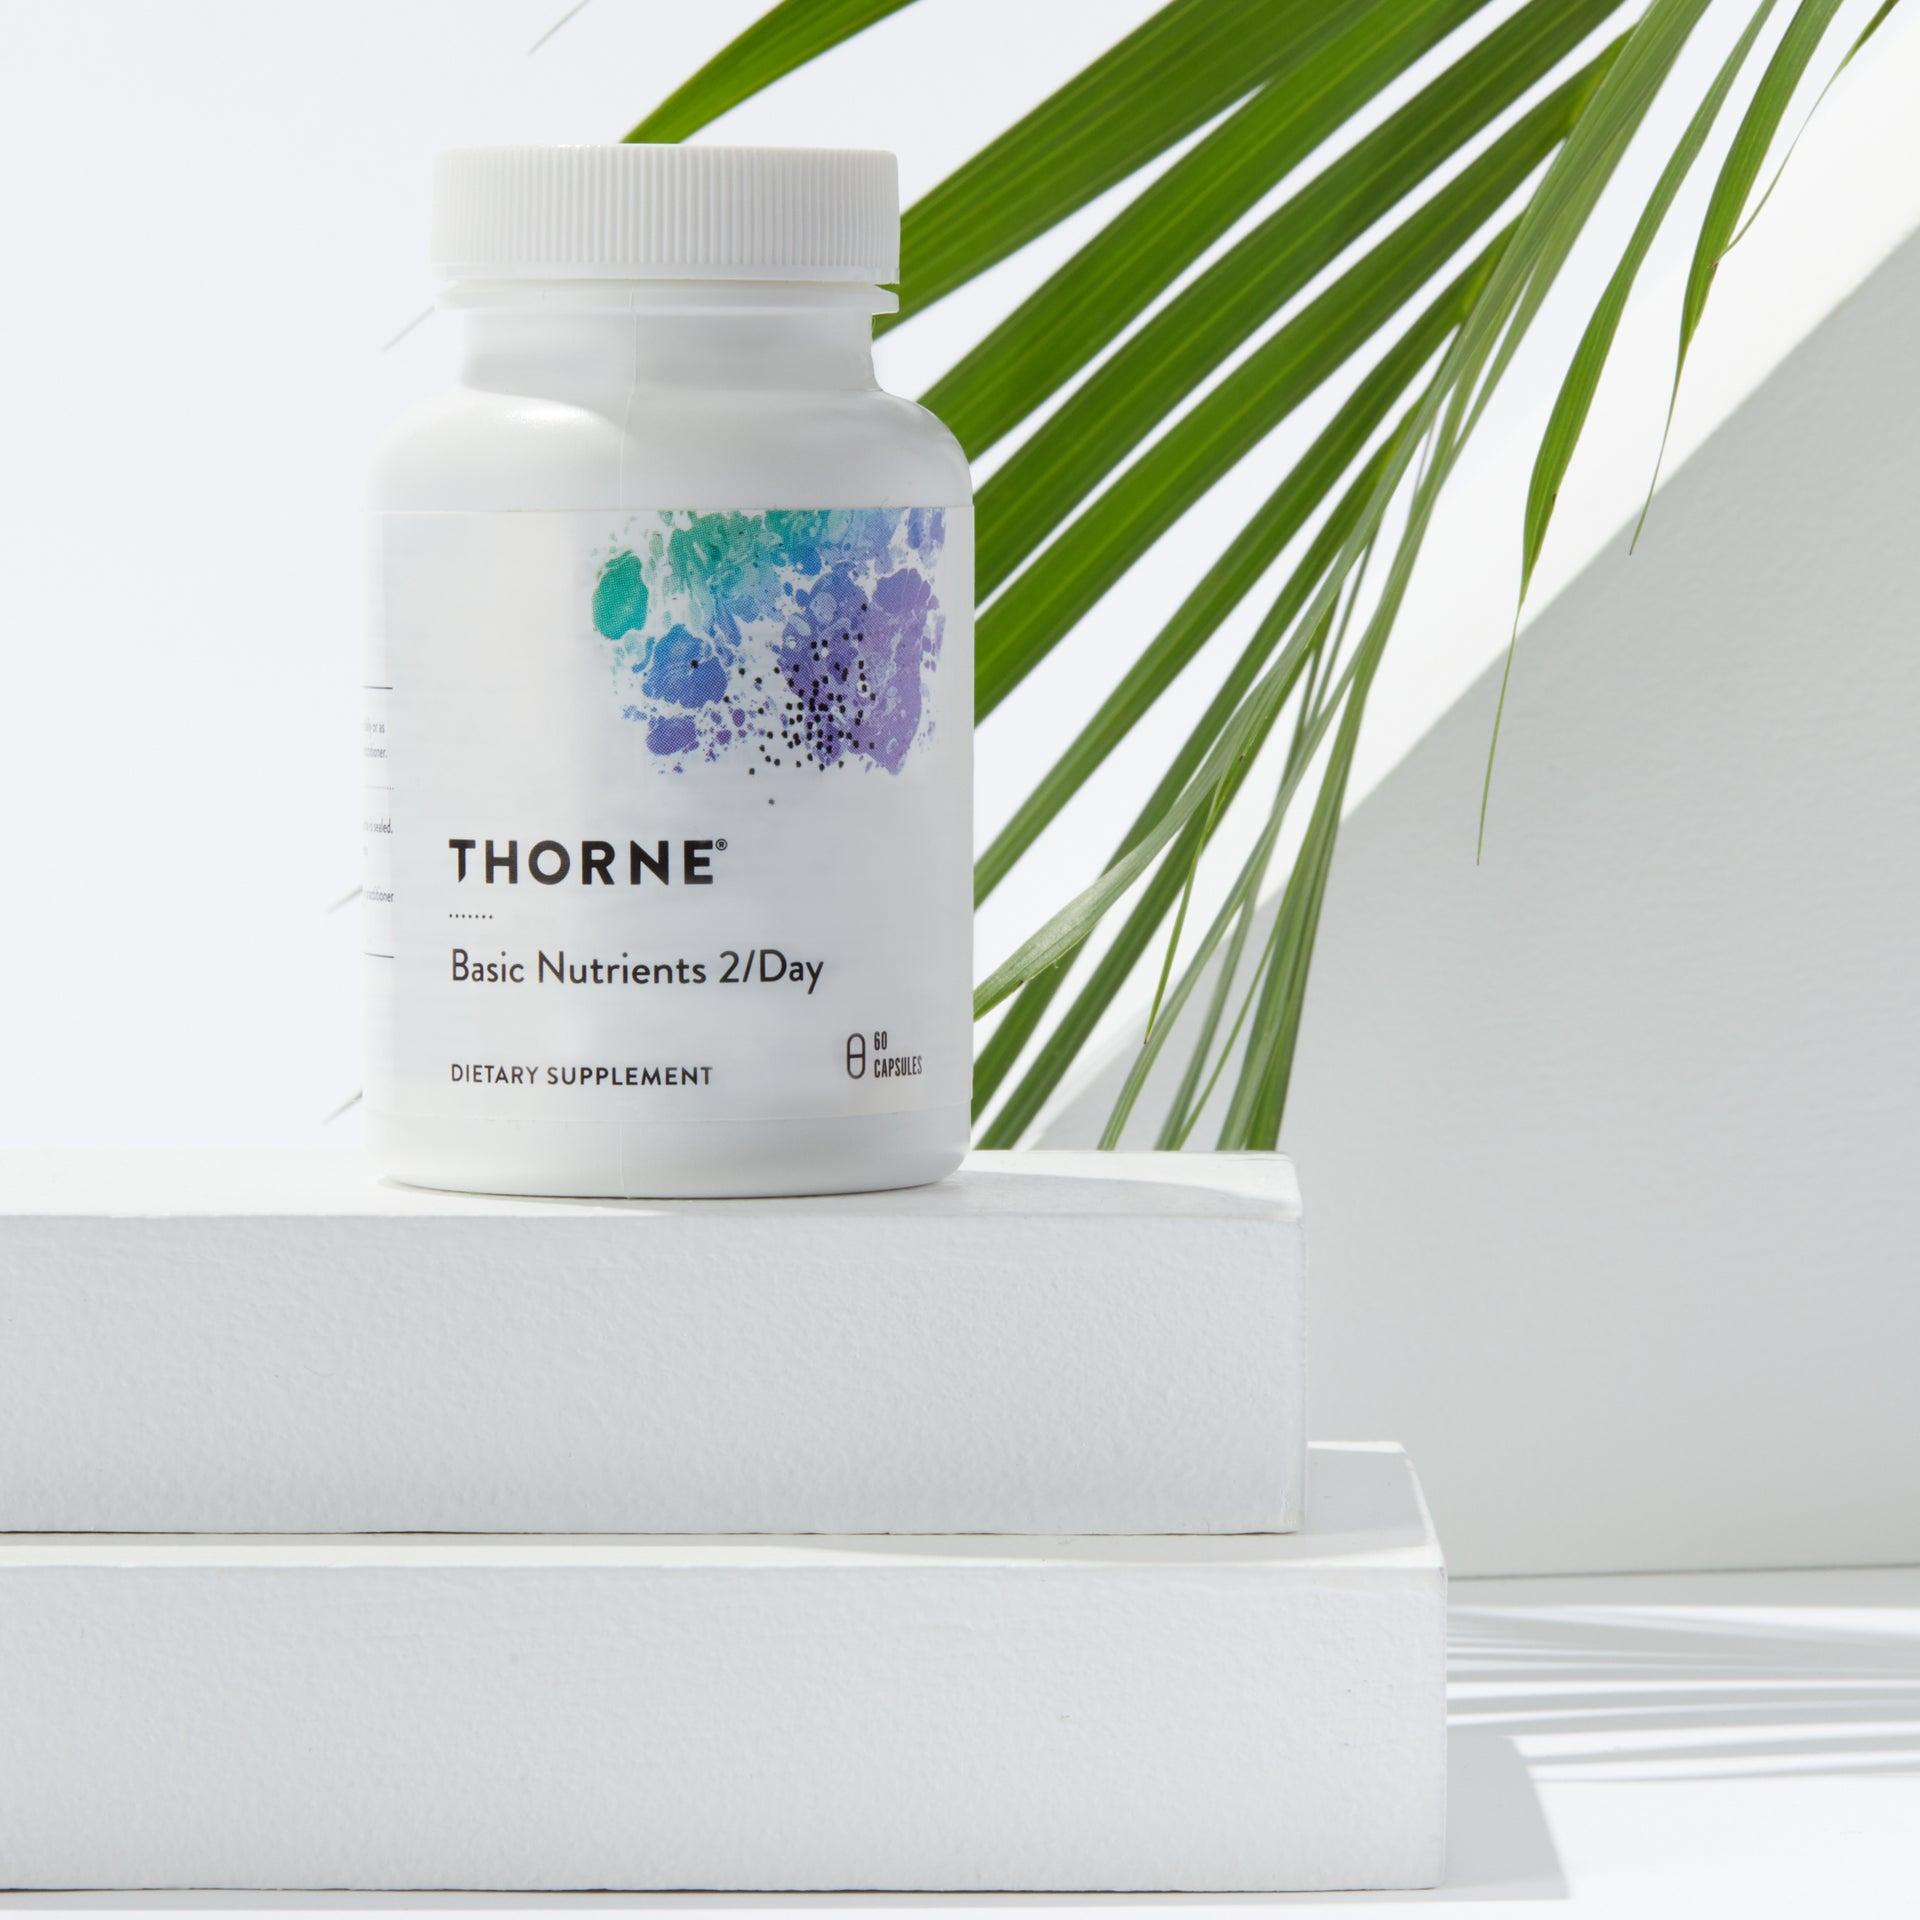 Thorne Basic Nutrients 2 per day